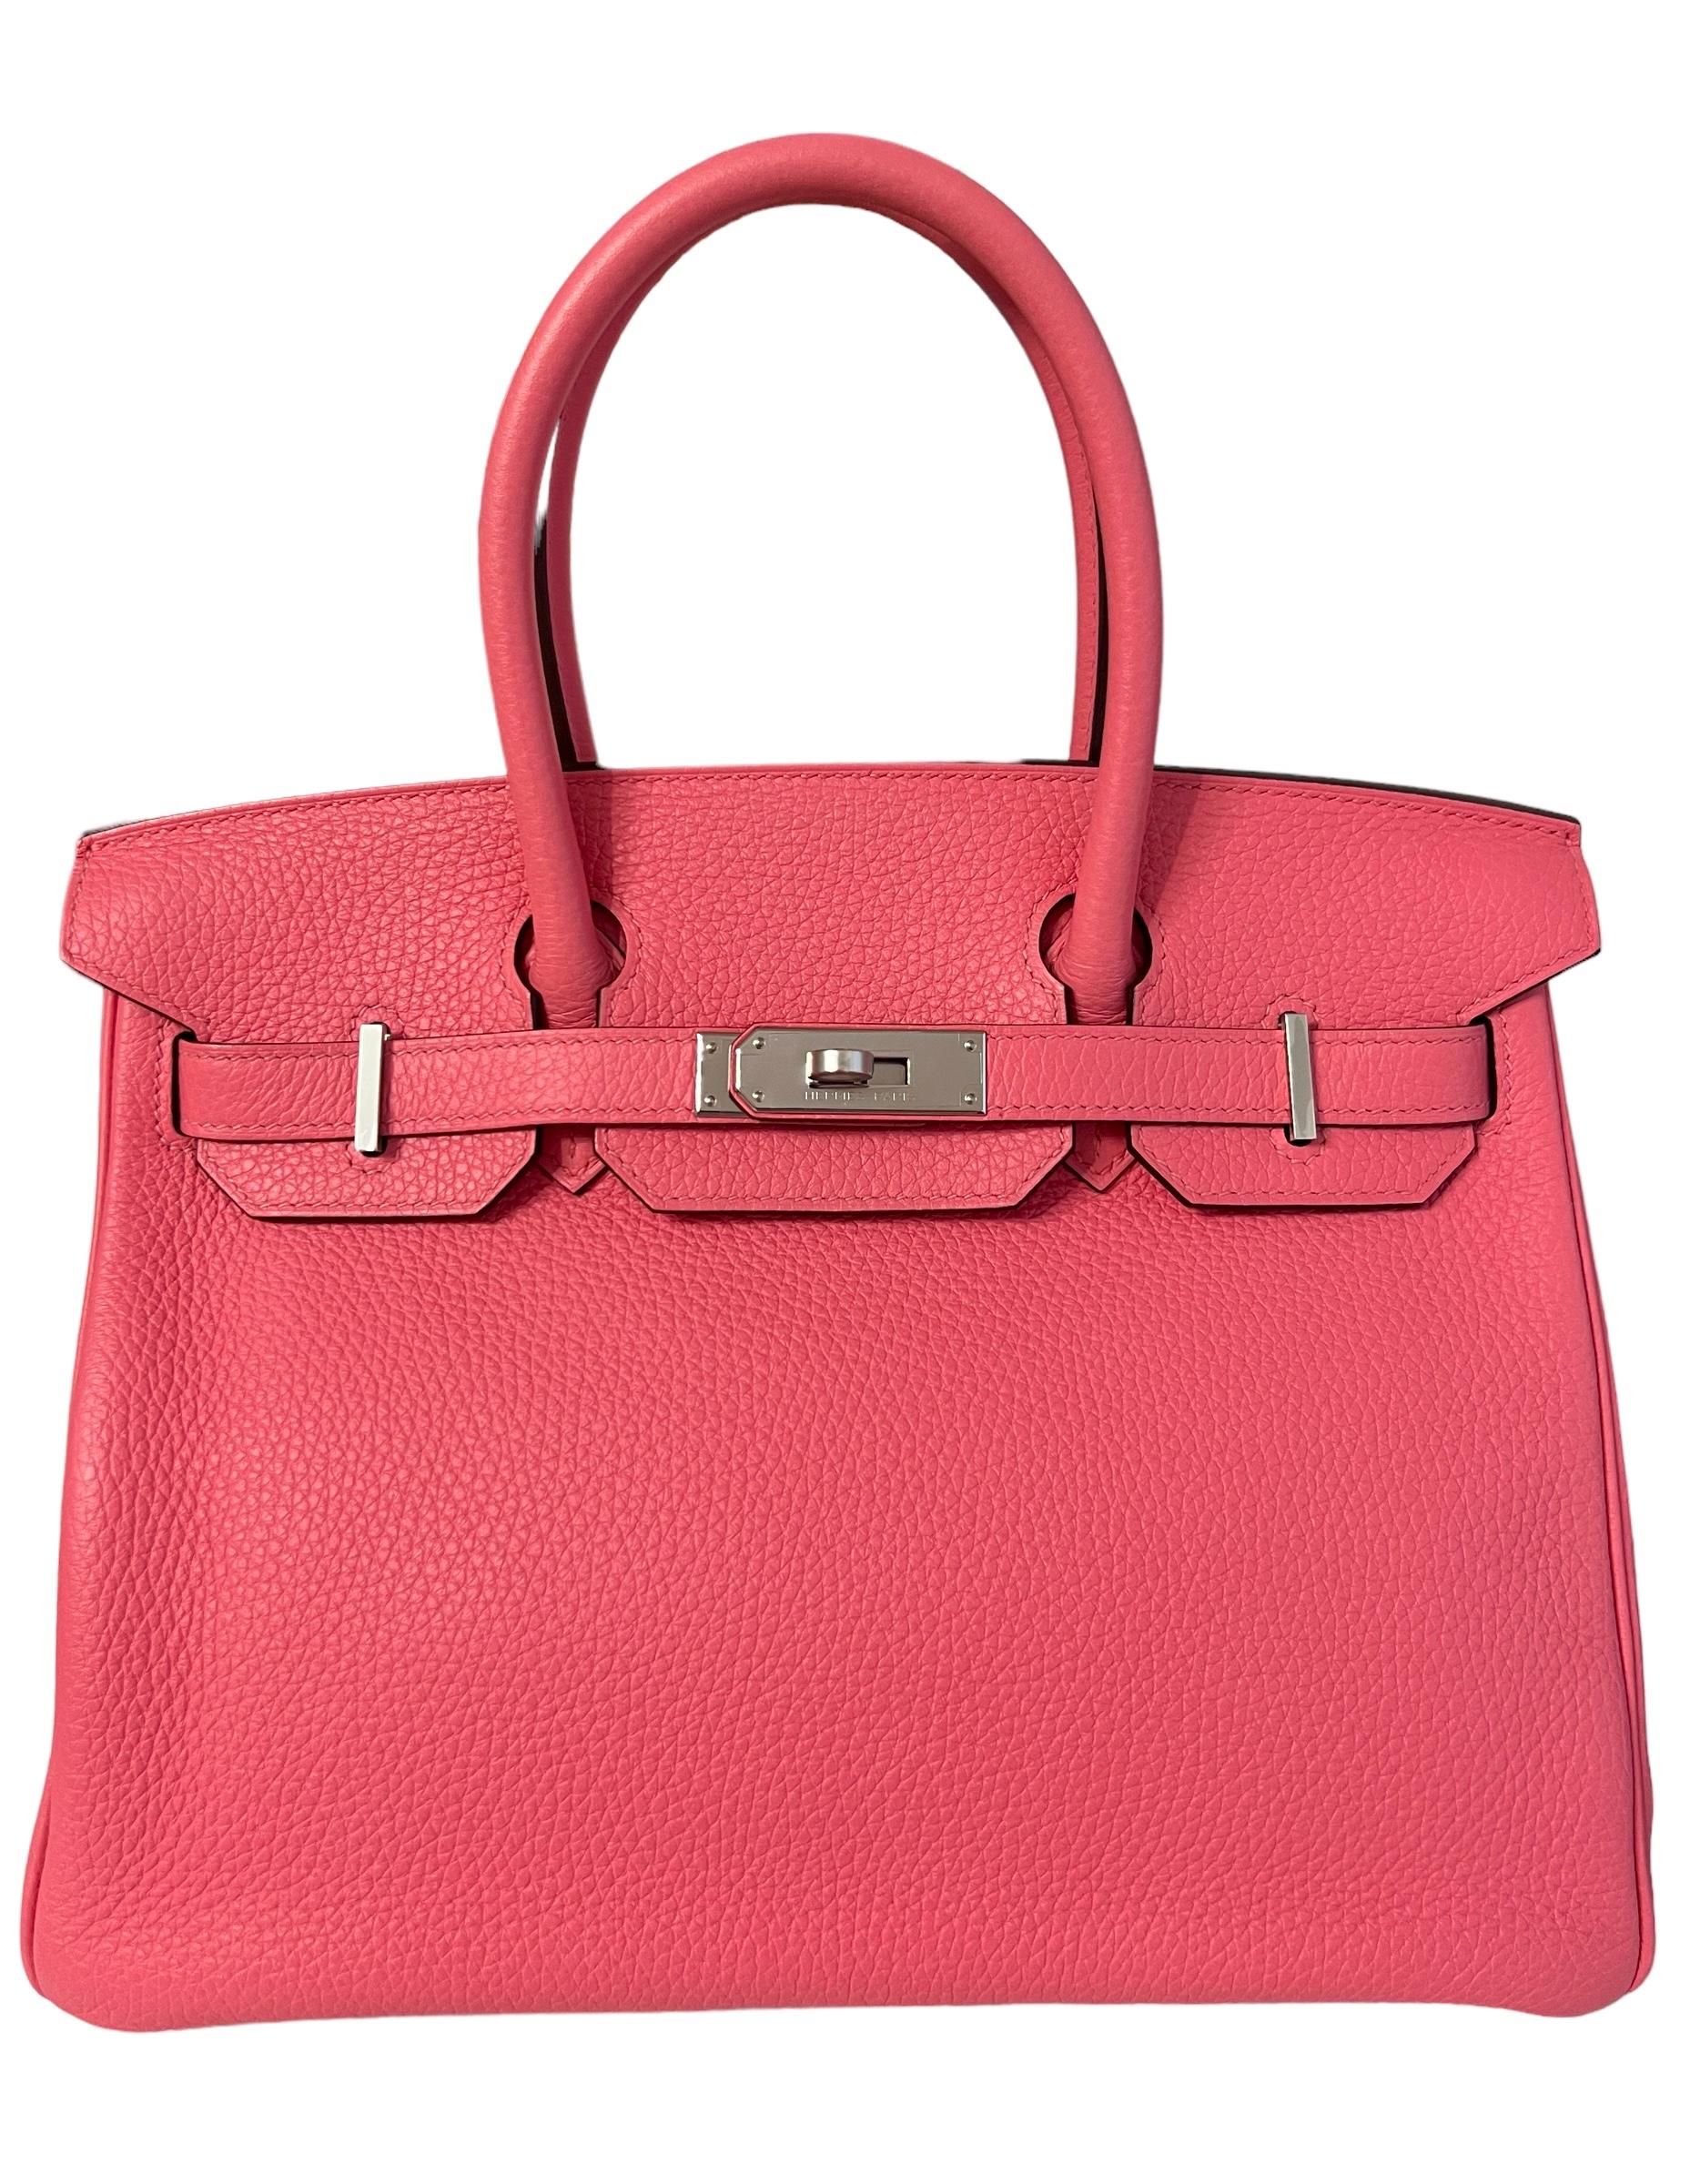 Stunning As New Hermes Birkin 30 Rose Azalee Pink Leather Palladium Hardware. Plastic on All Hardware and Feet. Y Stamp 2020.

Please see photo 10 in the listing, a few minor marks on the interior bottom of the bag due to the lock being shipped